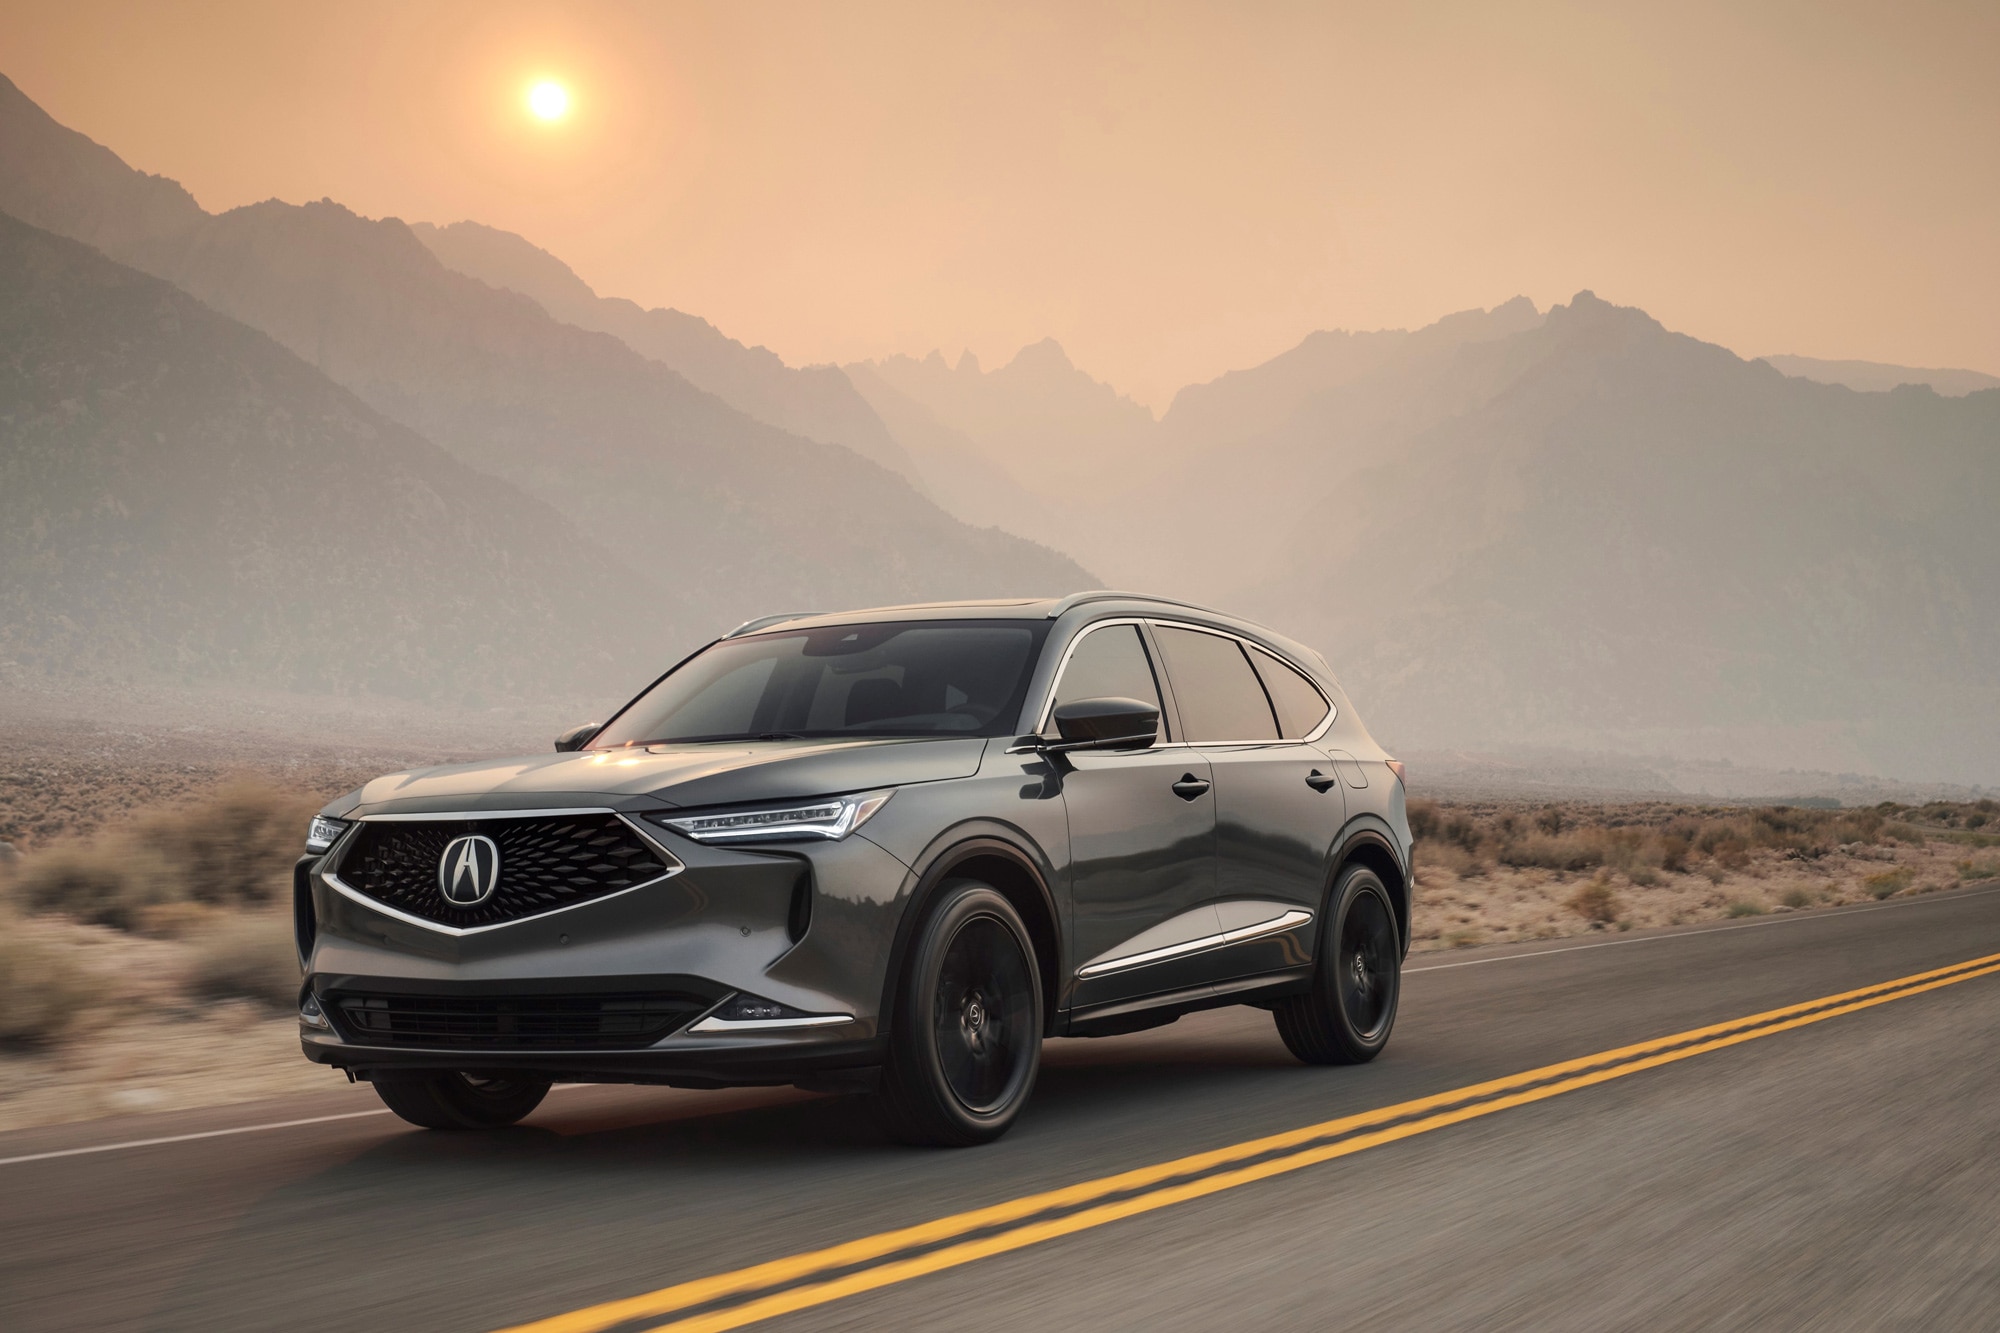 Gray 2023 Acura MDX on highway at sunset